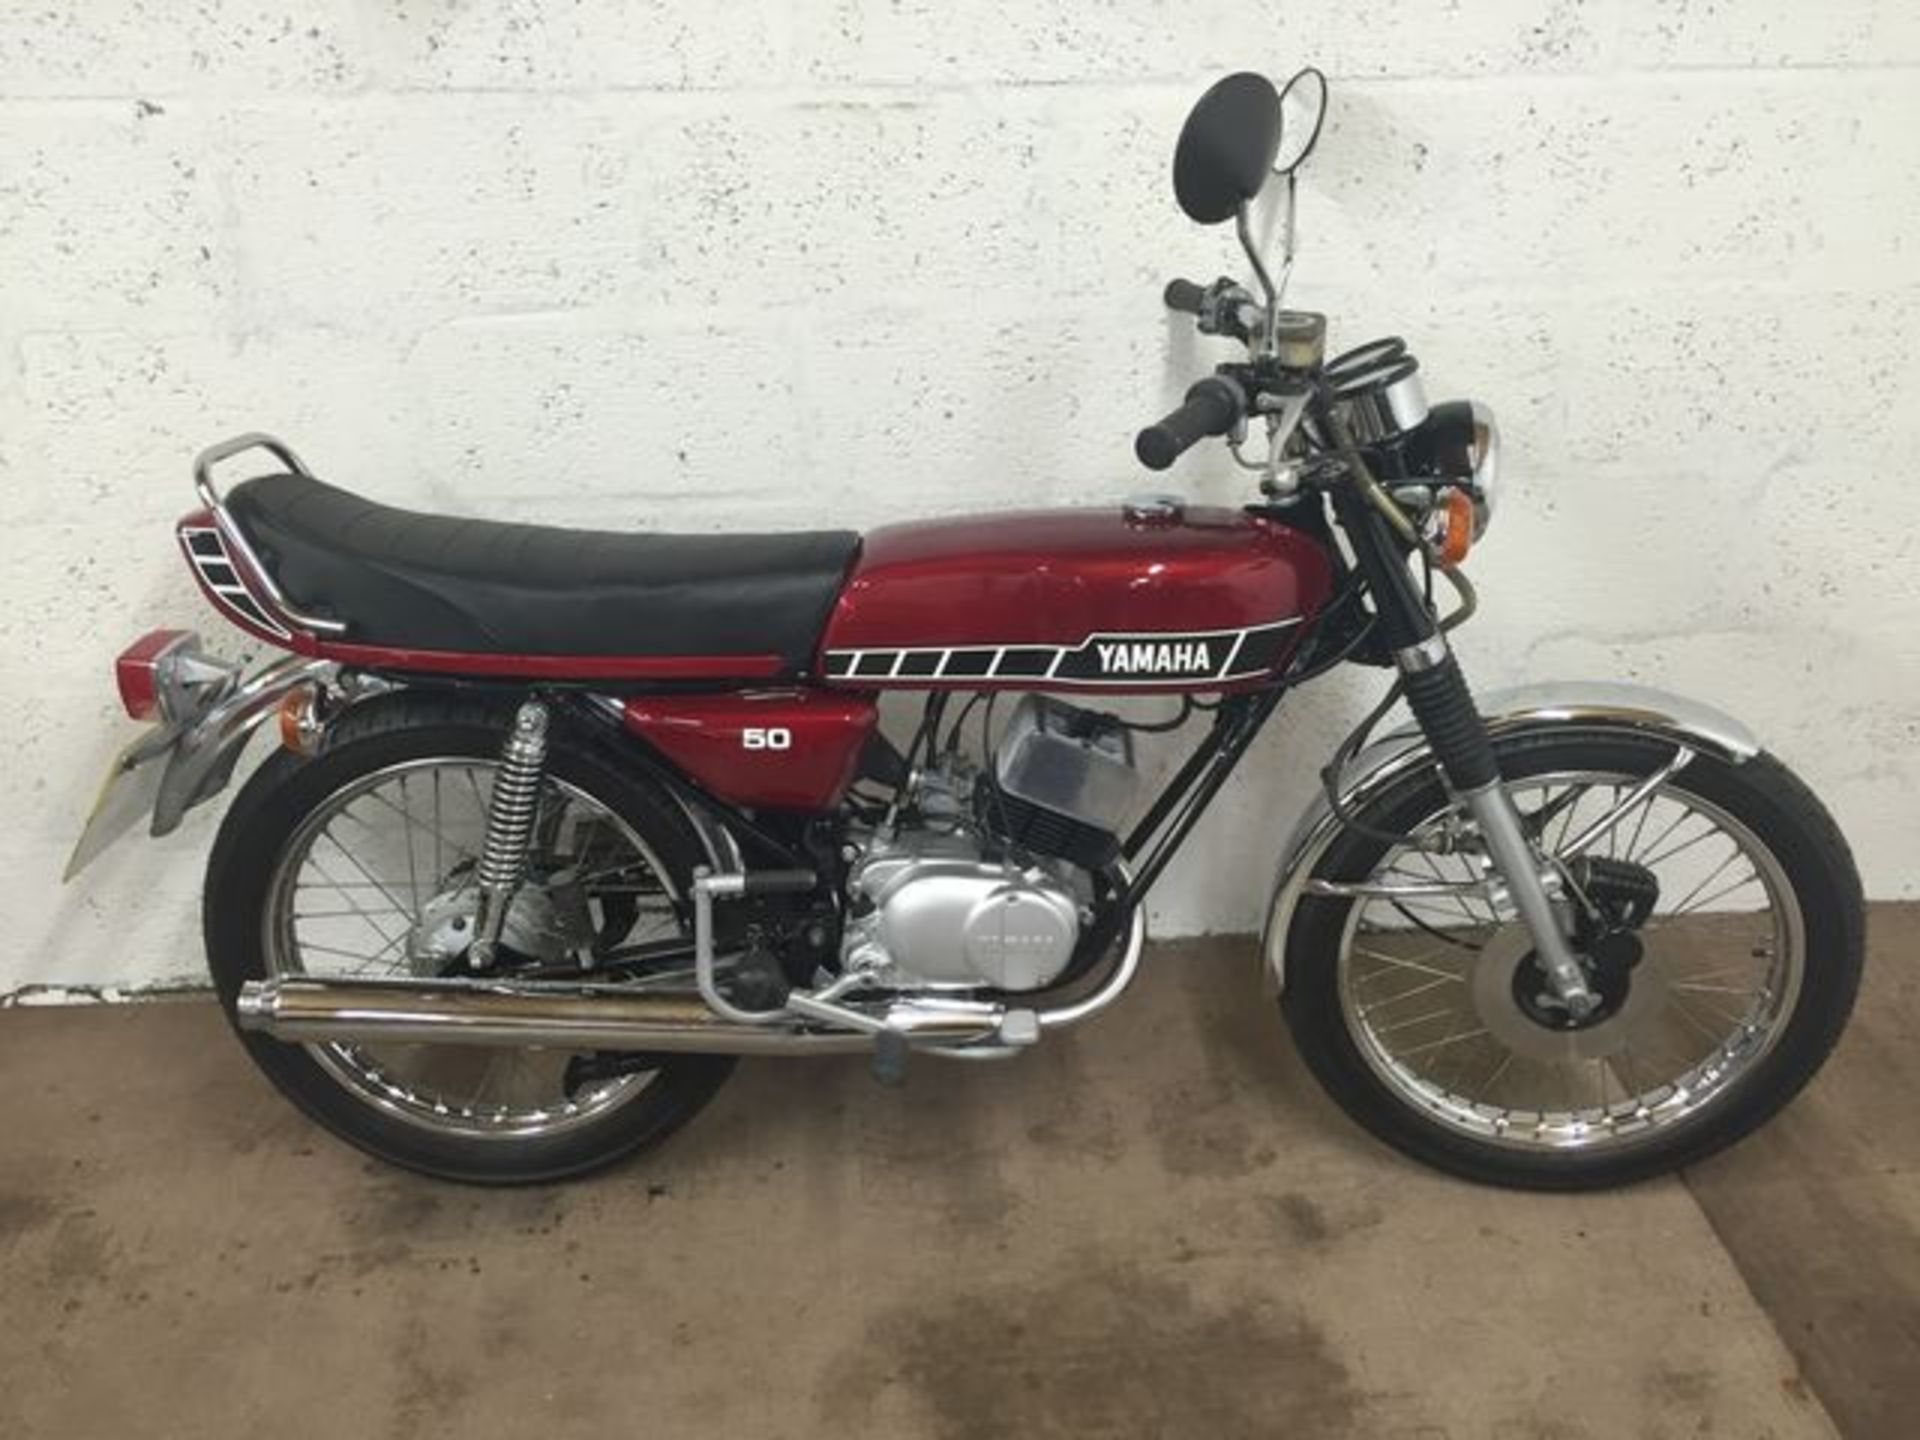 YAMAHA, RD50M - 49cc, Frame number 2L5004355 - this example is a French import registered in the - Image 4 of 7